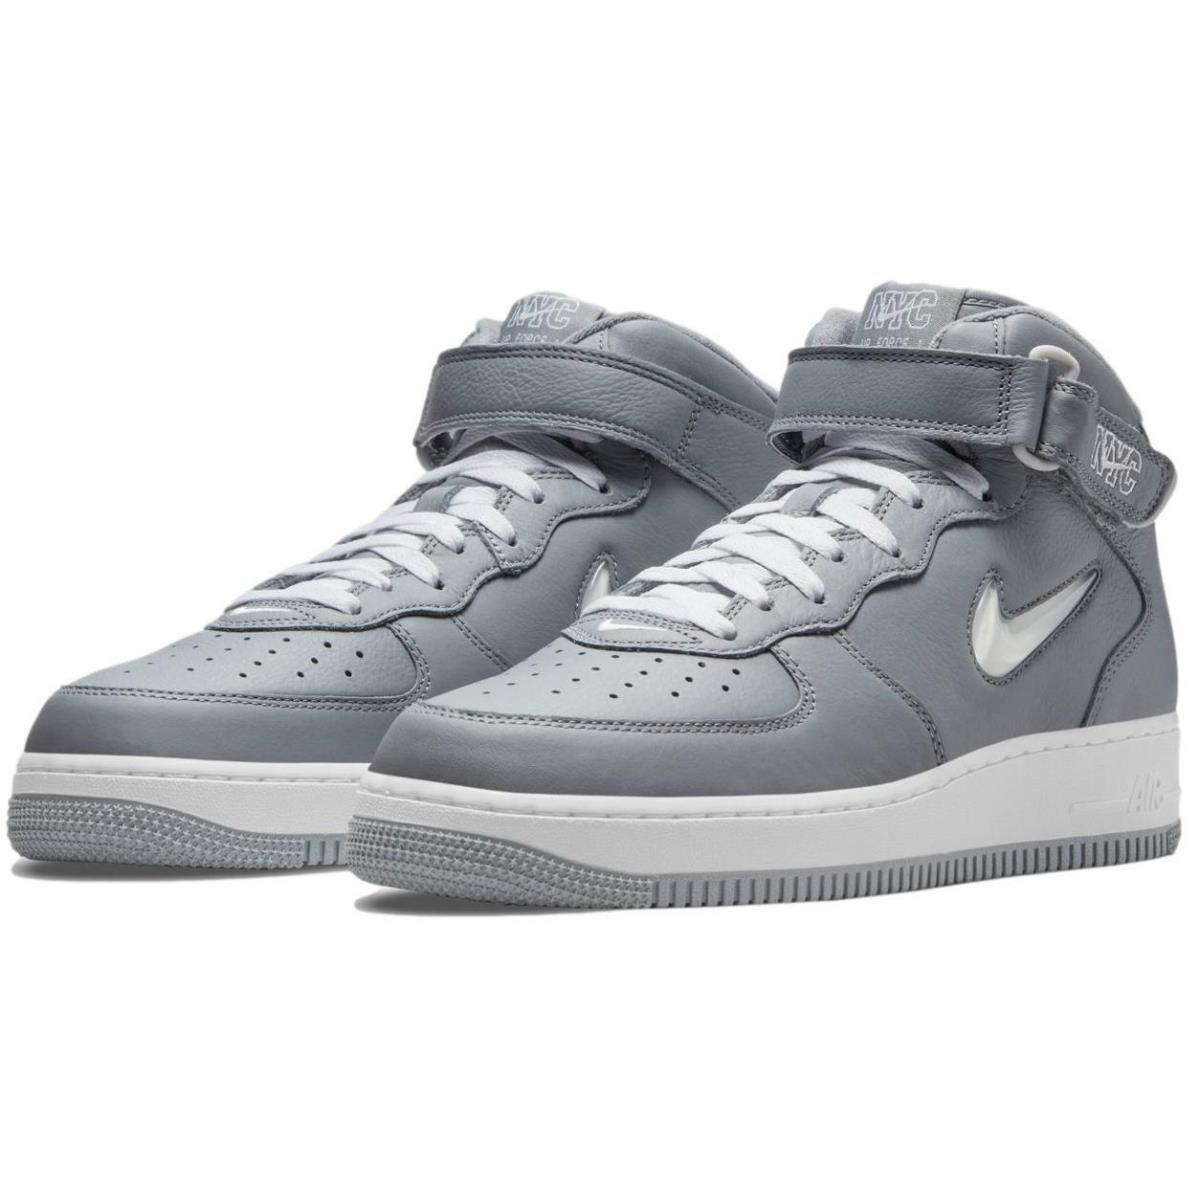 Nike Air Force 1 Mid Jewel QS `nyc - Cool Grey` Men`s Shoes Sneakers DH5622-001